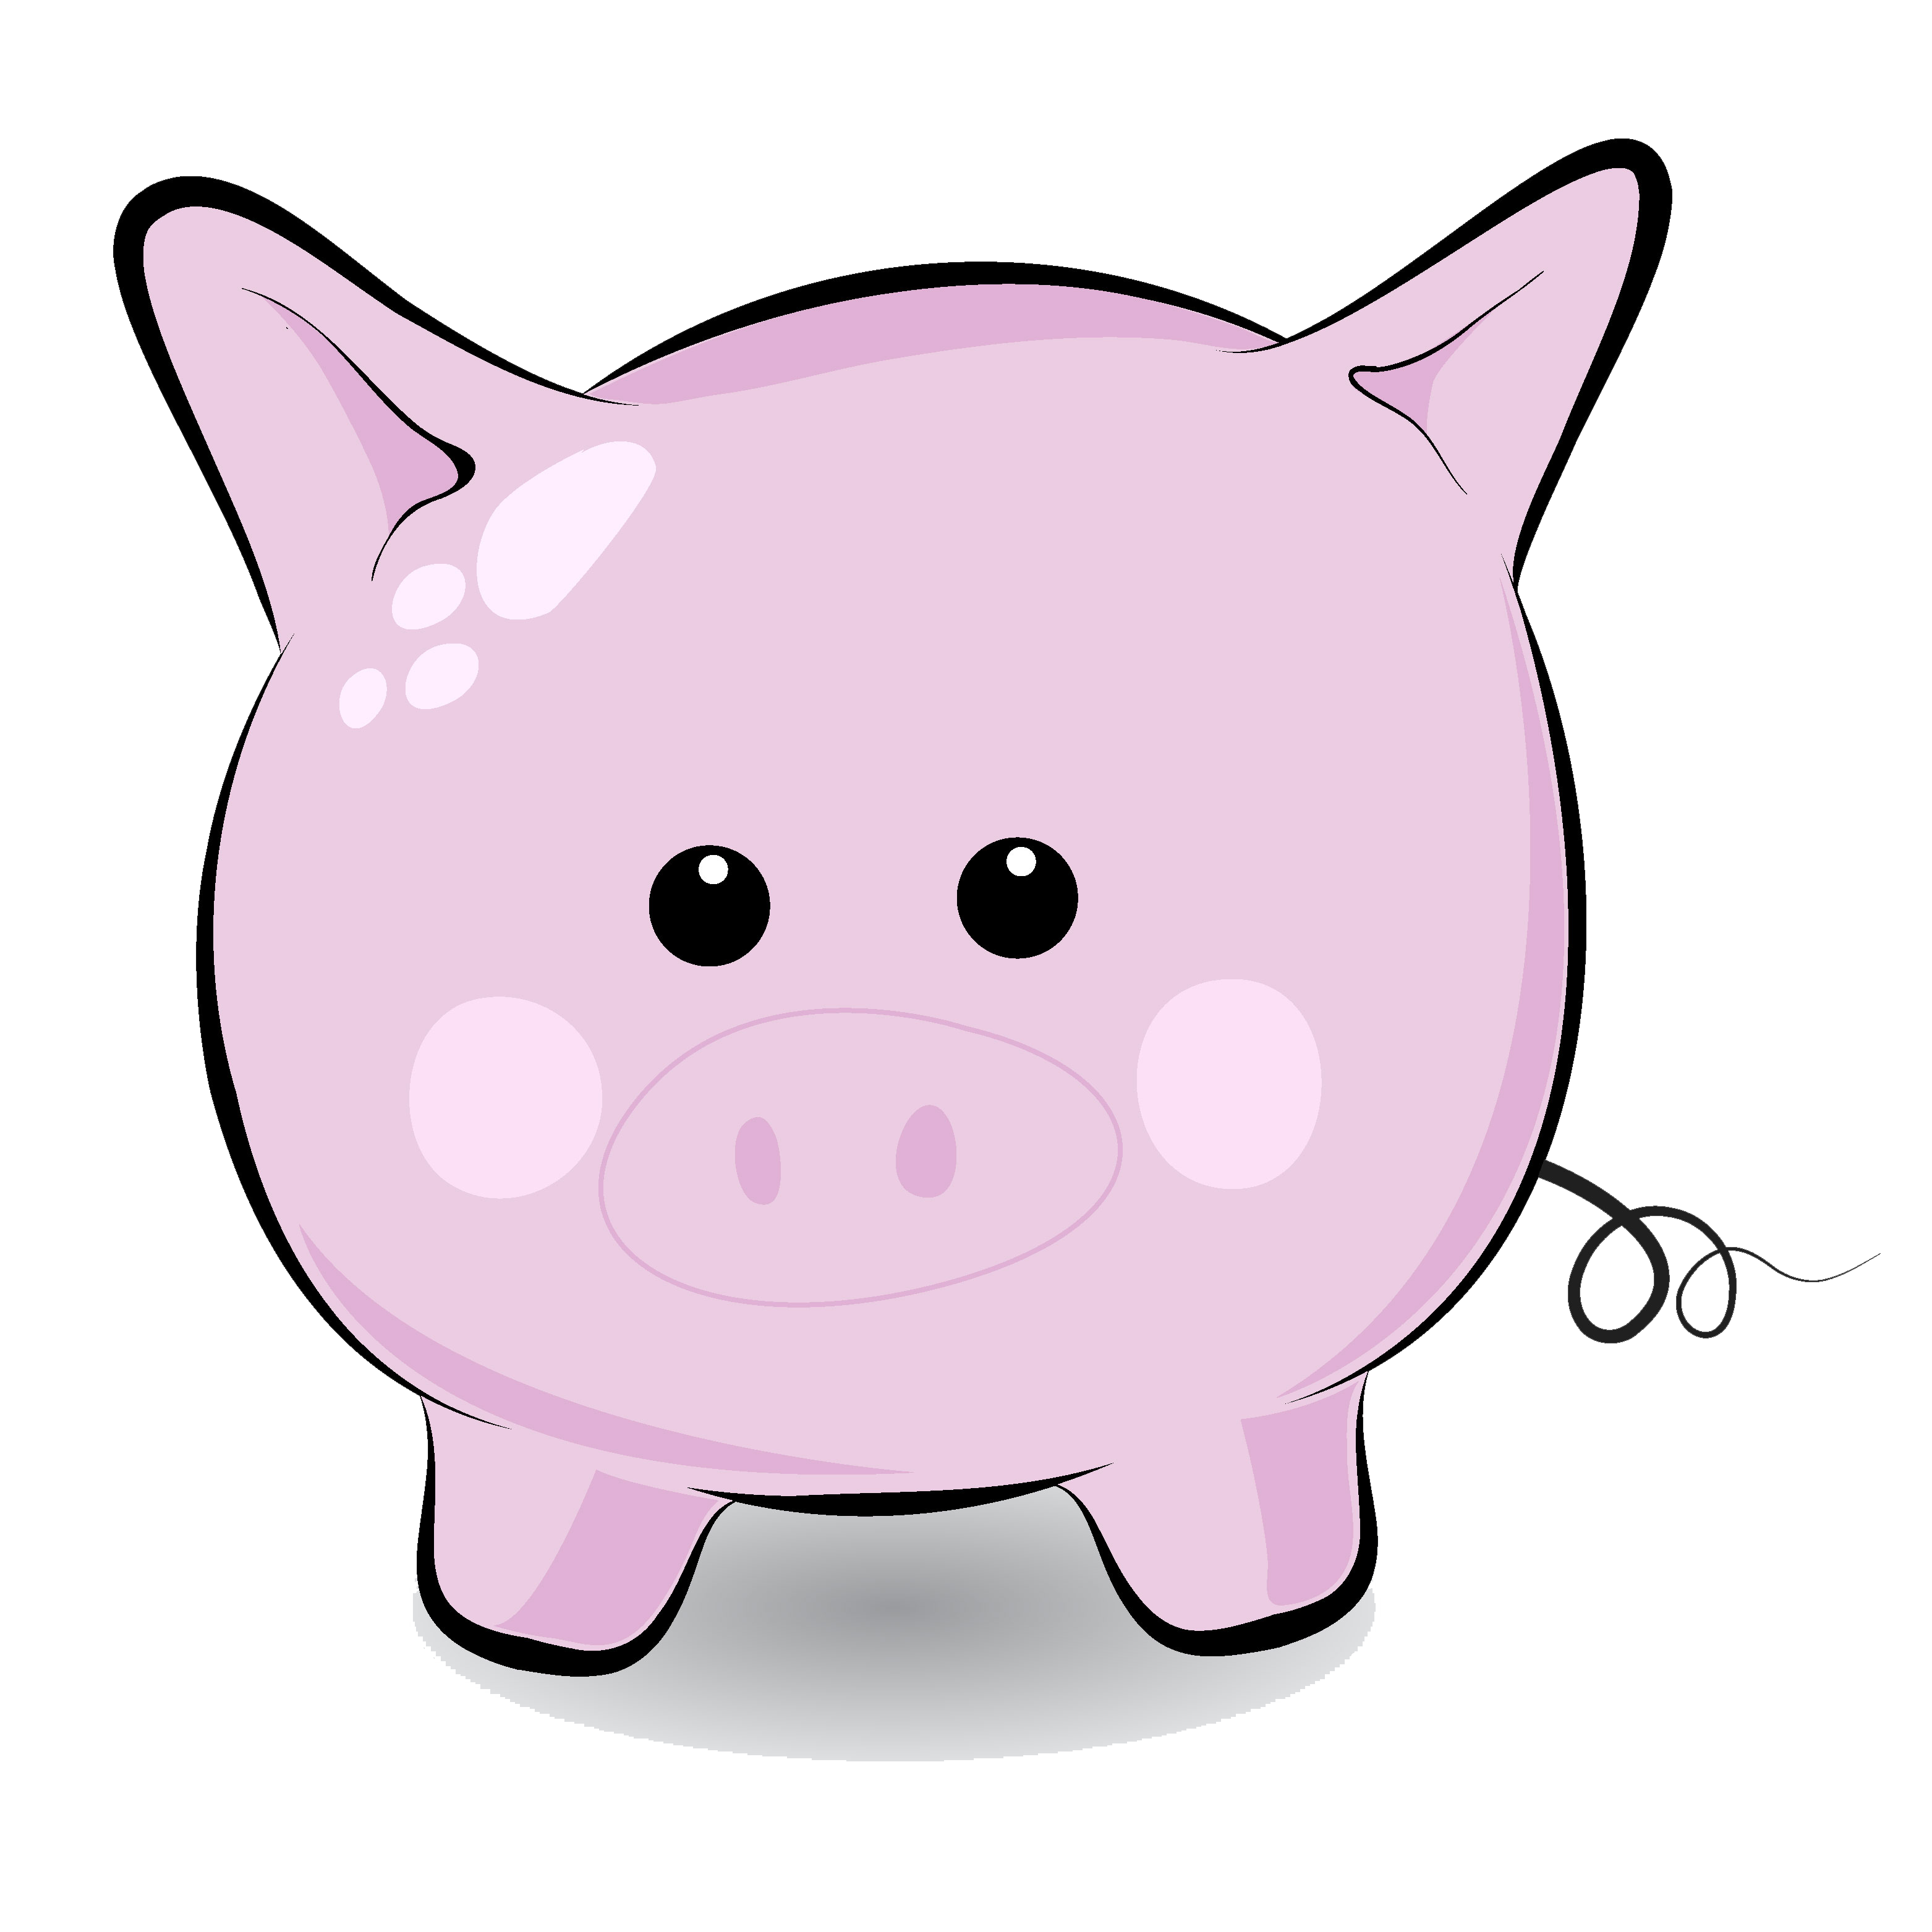 Guinea Pig Clipart Funny Pig Clipartfree To Use Public Domain Pig Clip